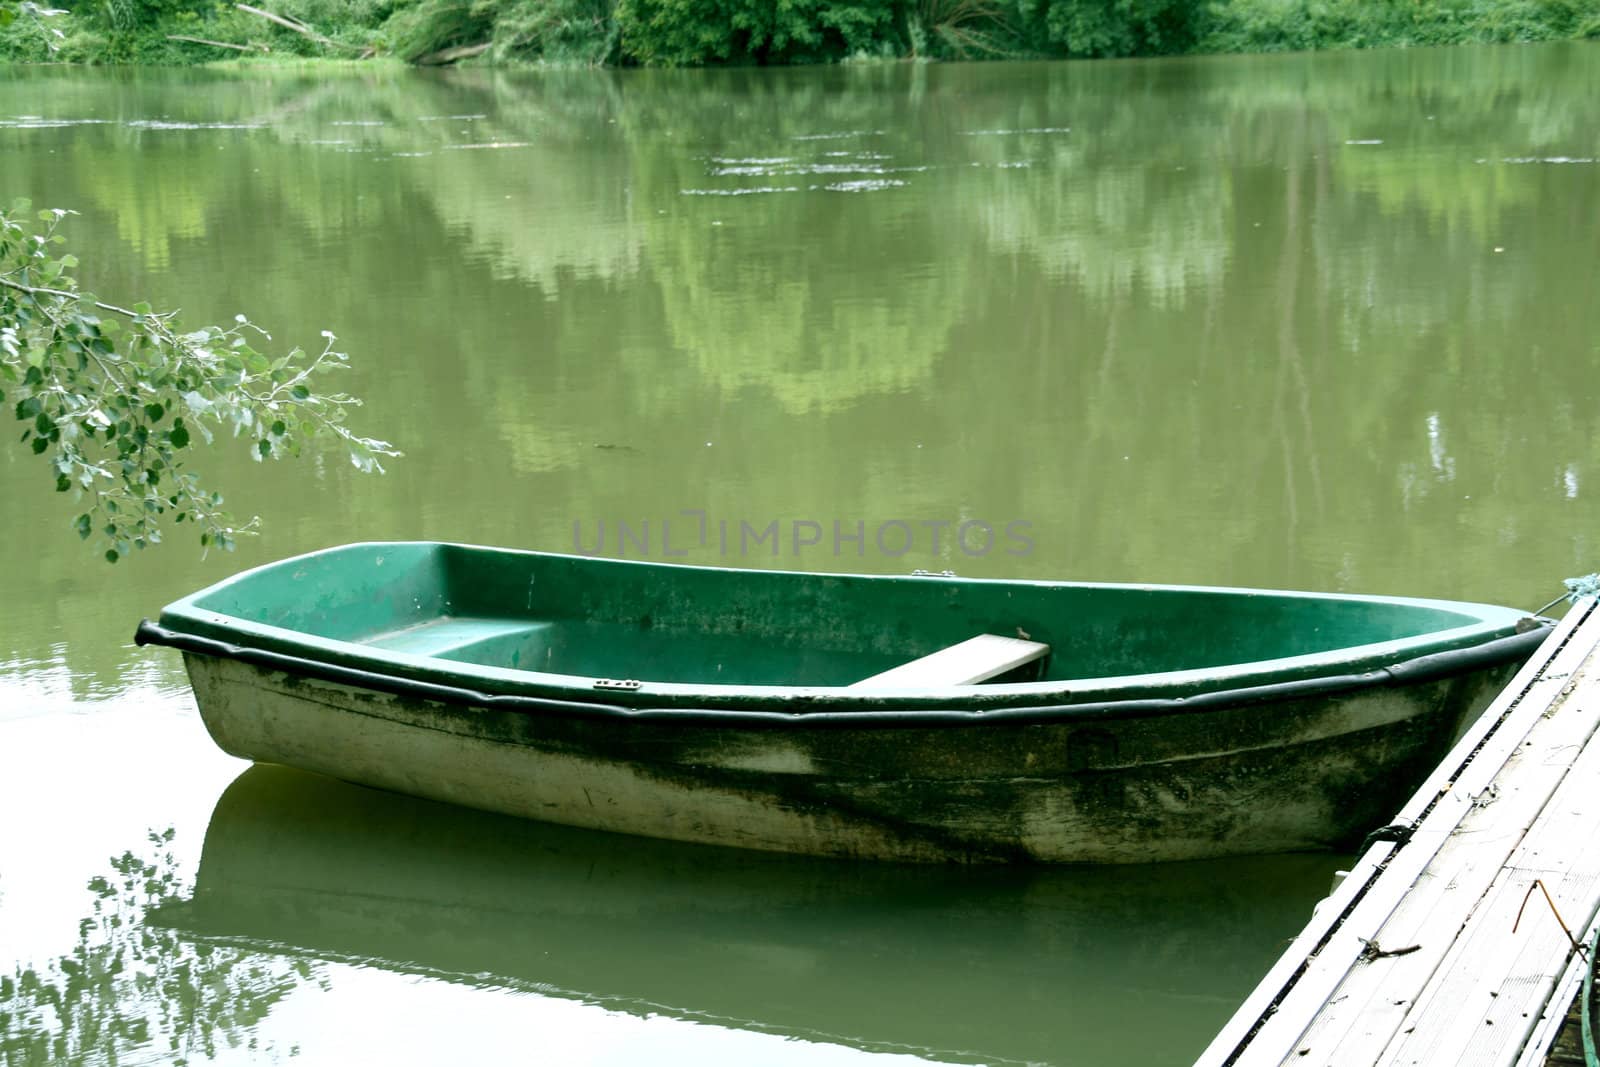 abandoned green boat at the river, peacefull landscape.